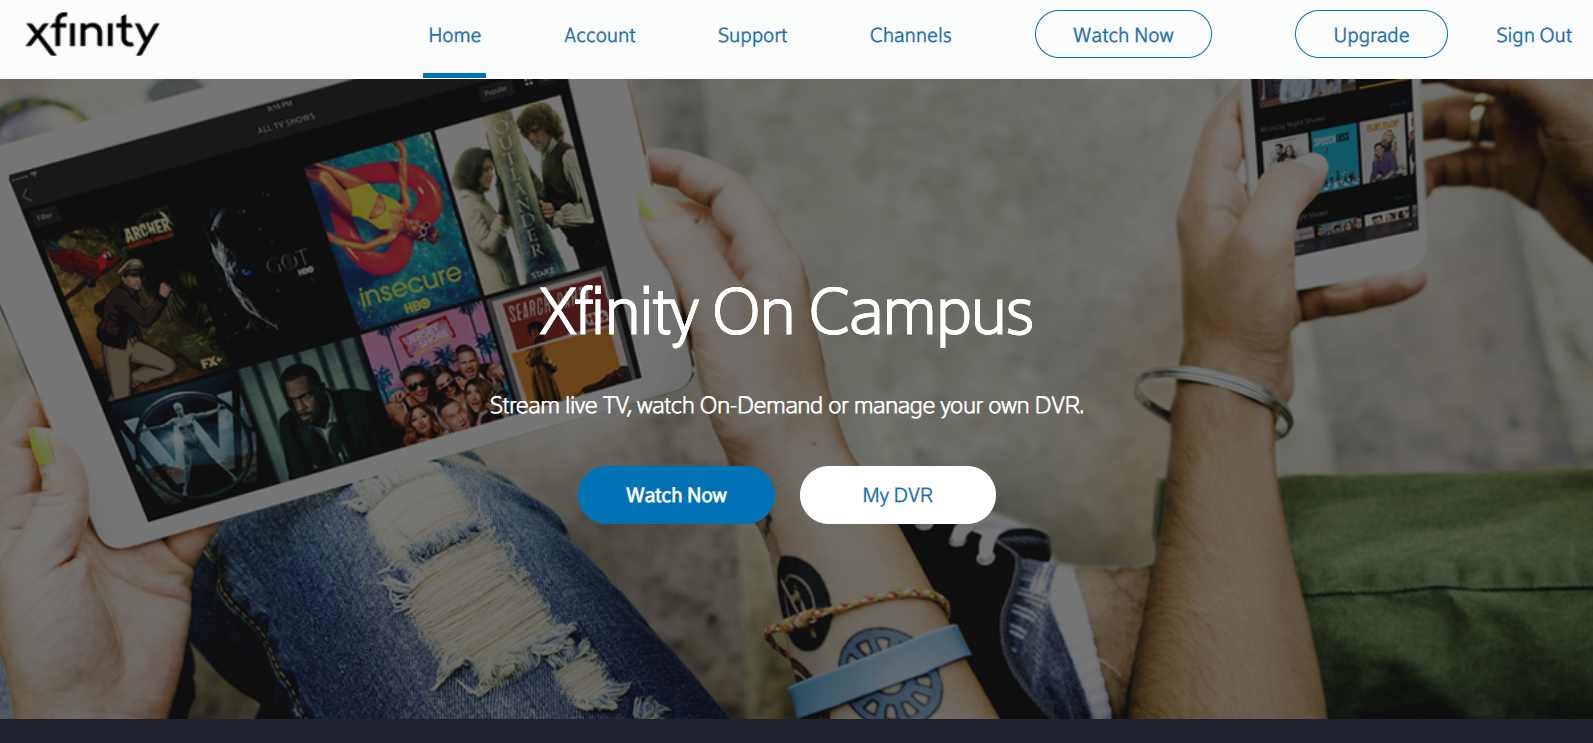 Xfinity On Campus main page